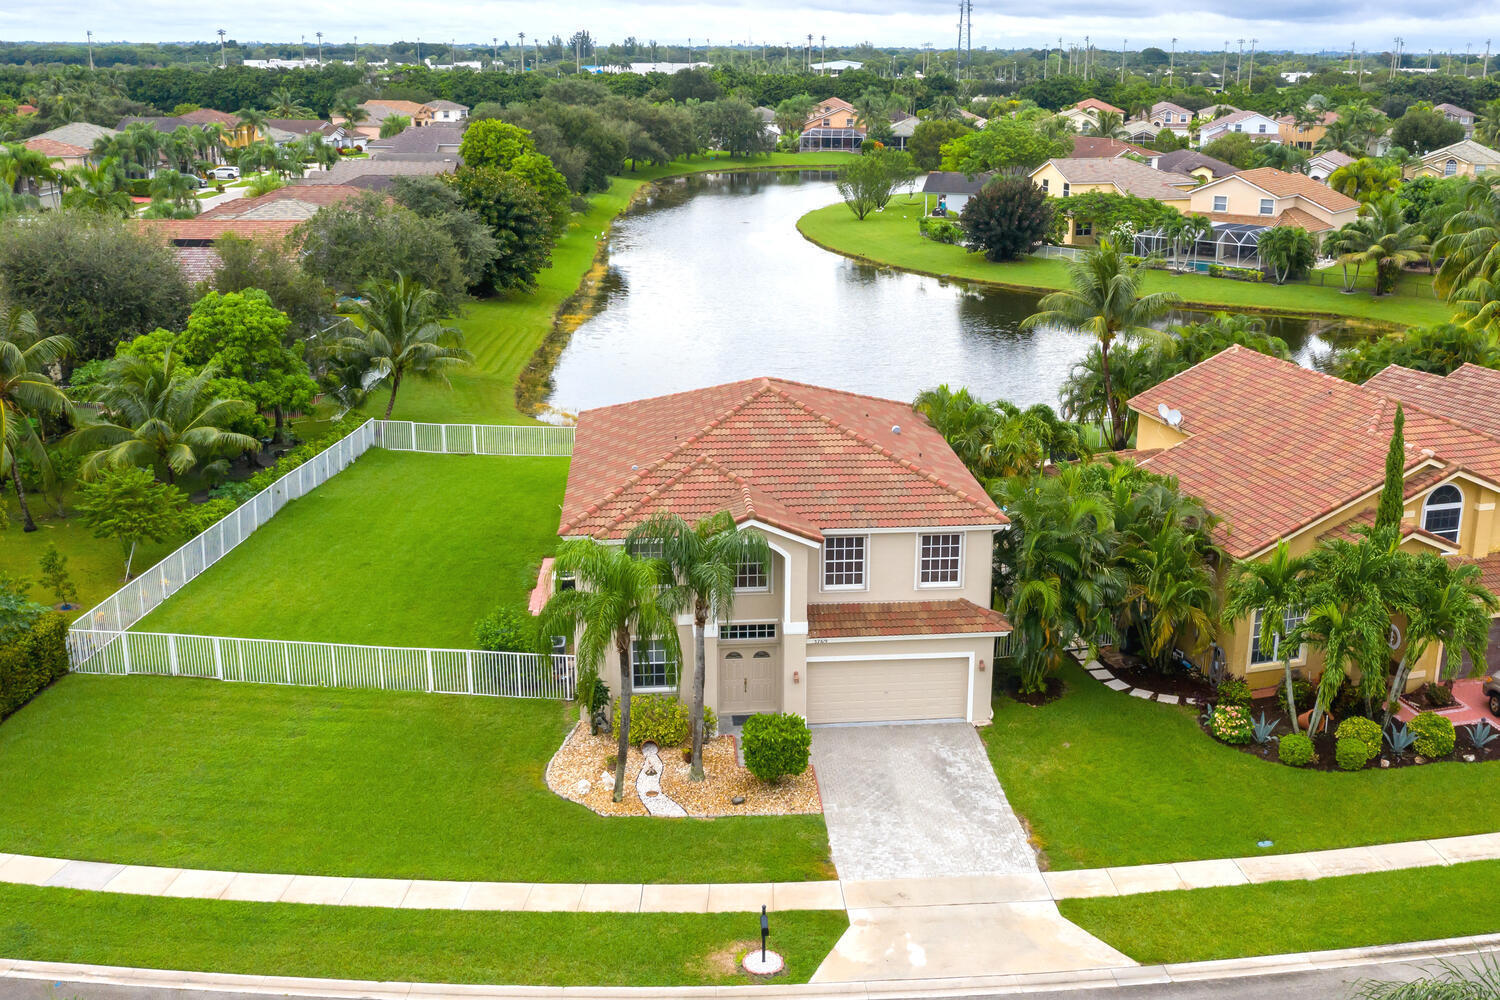 Must See Property-large-002-003-Aerial 2